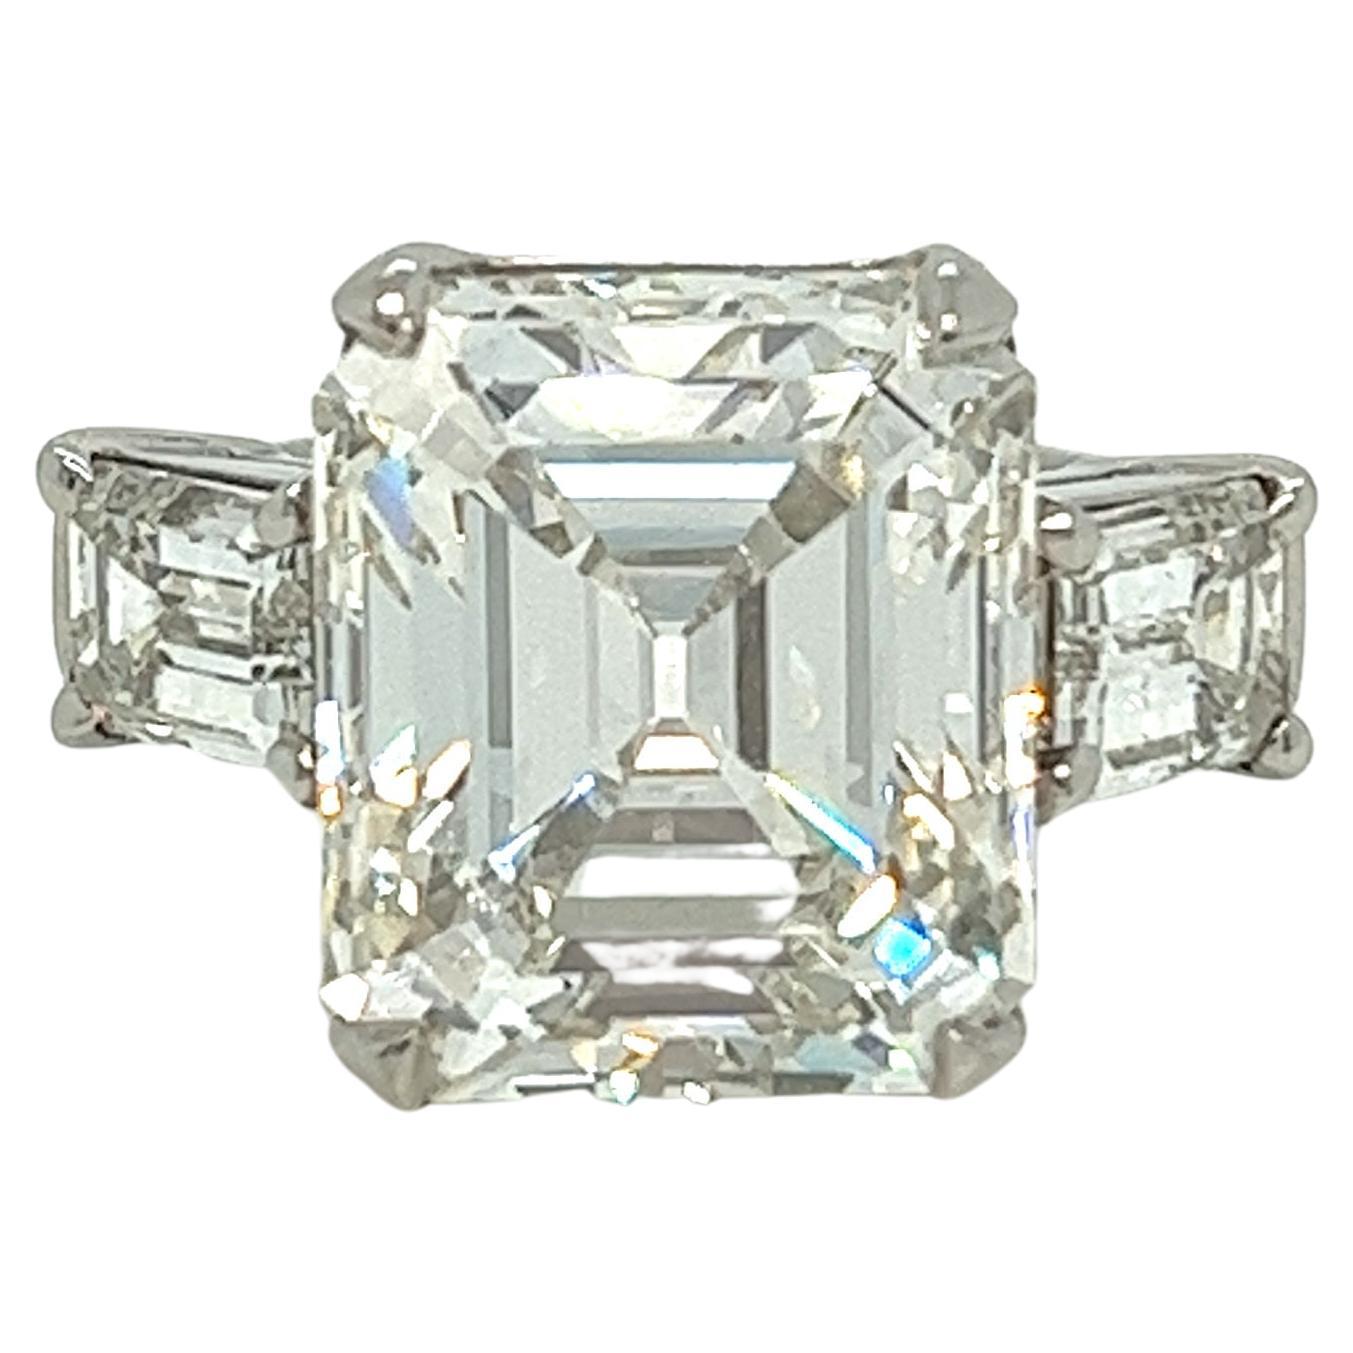 GIA Certified 10.58 ct. Emerald Cut I VS1 Mid-Century Engagement Ring